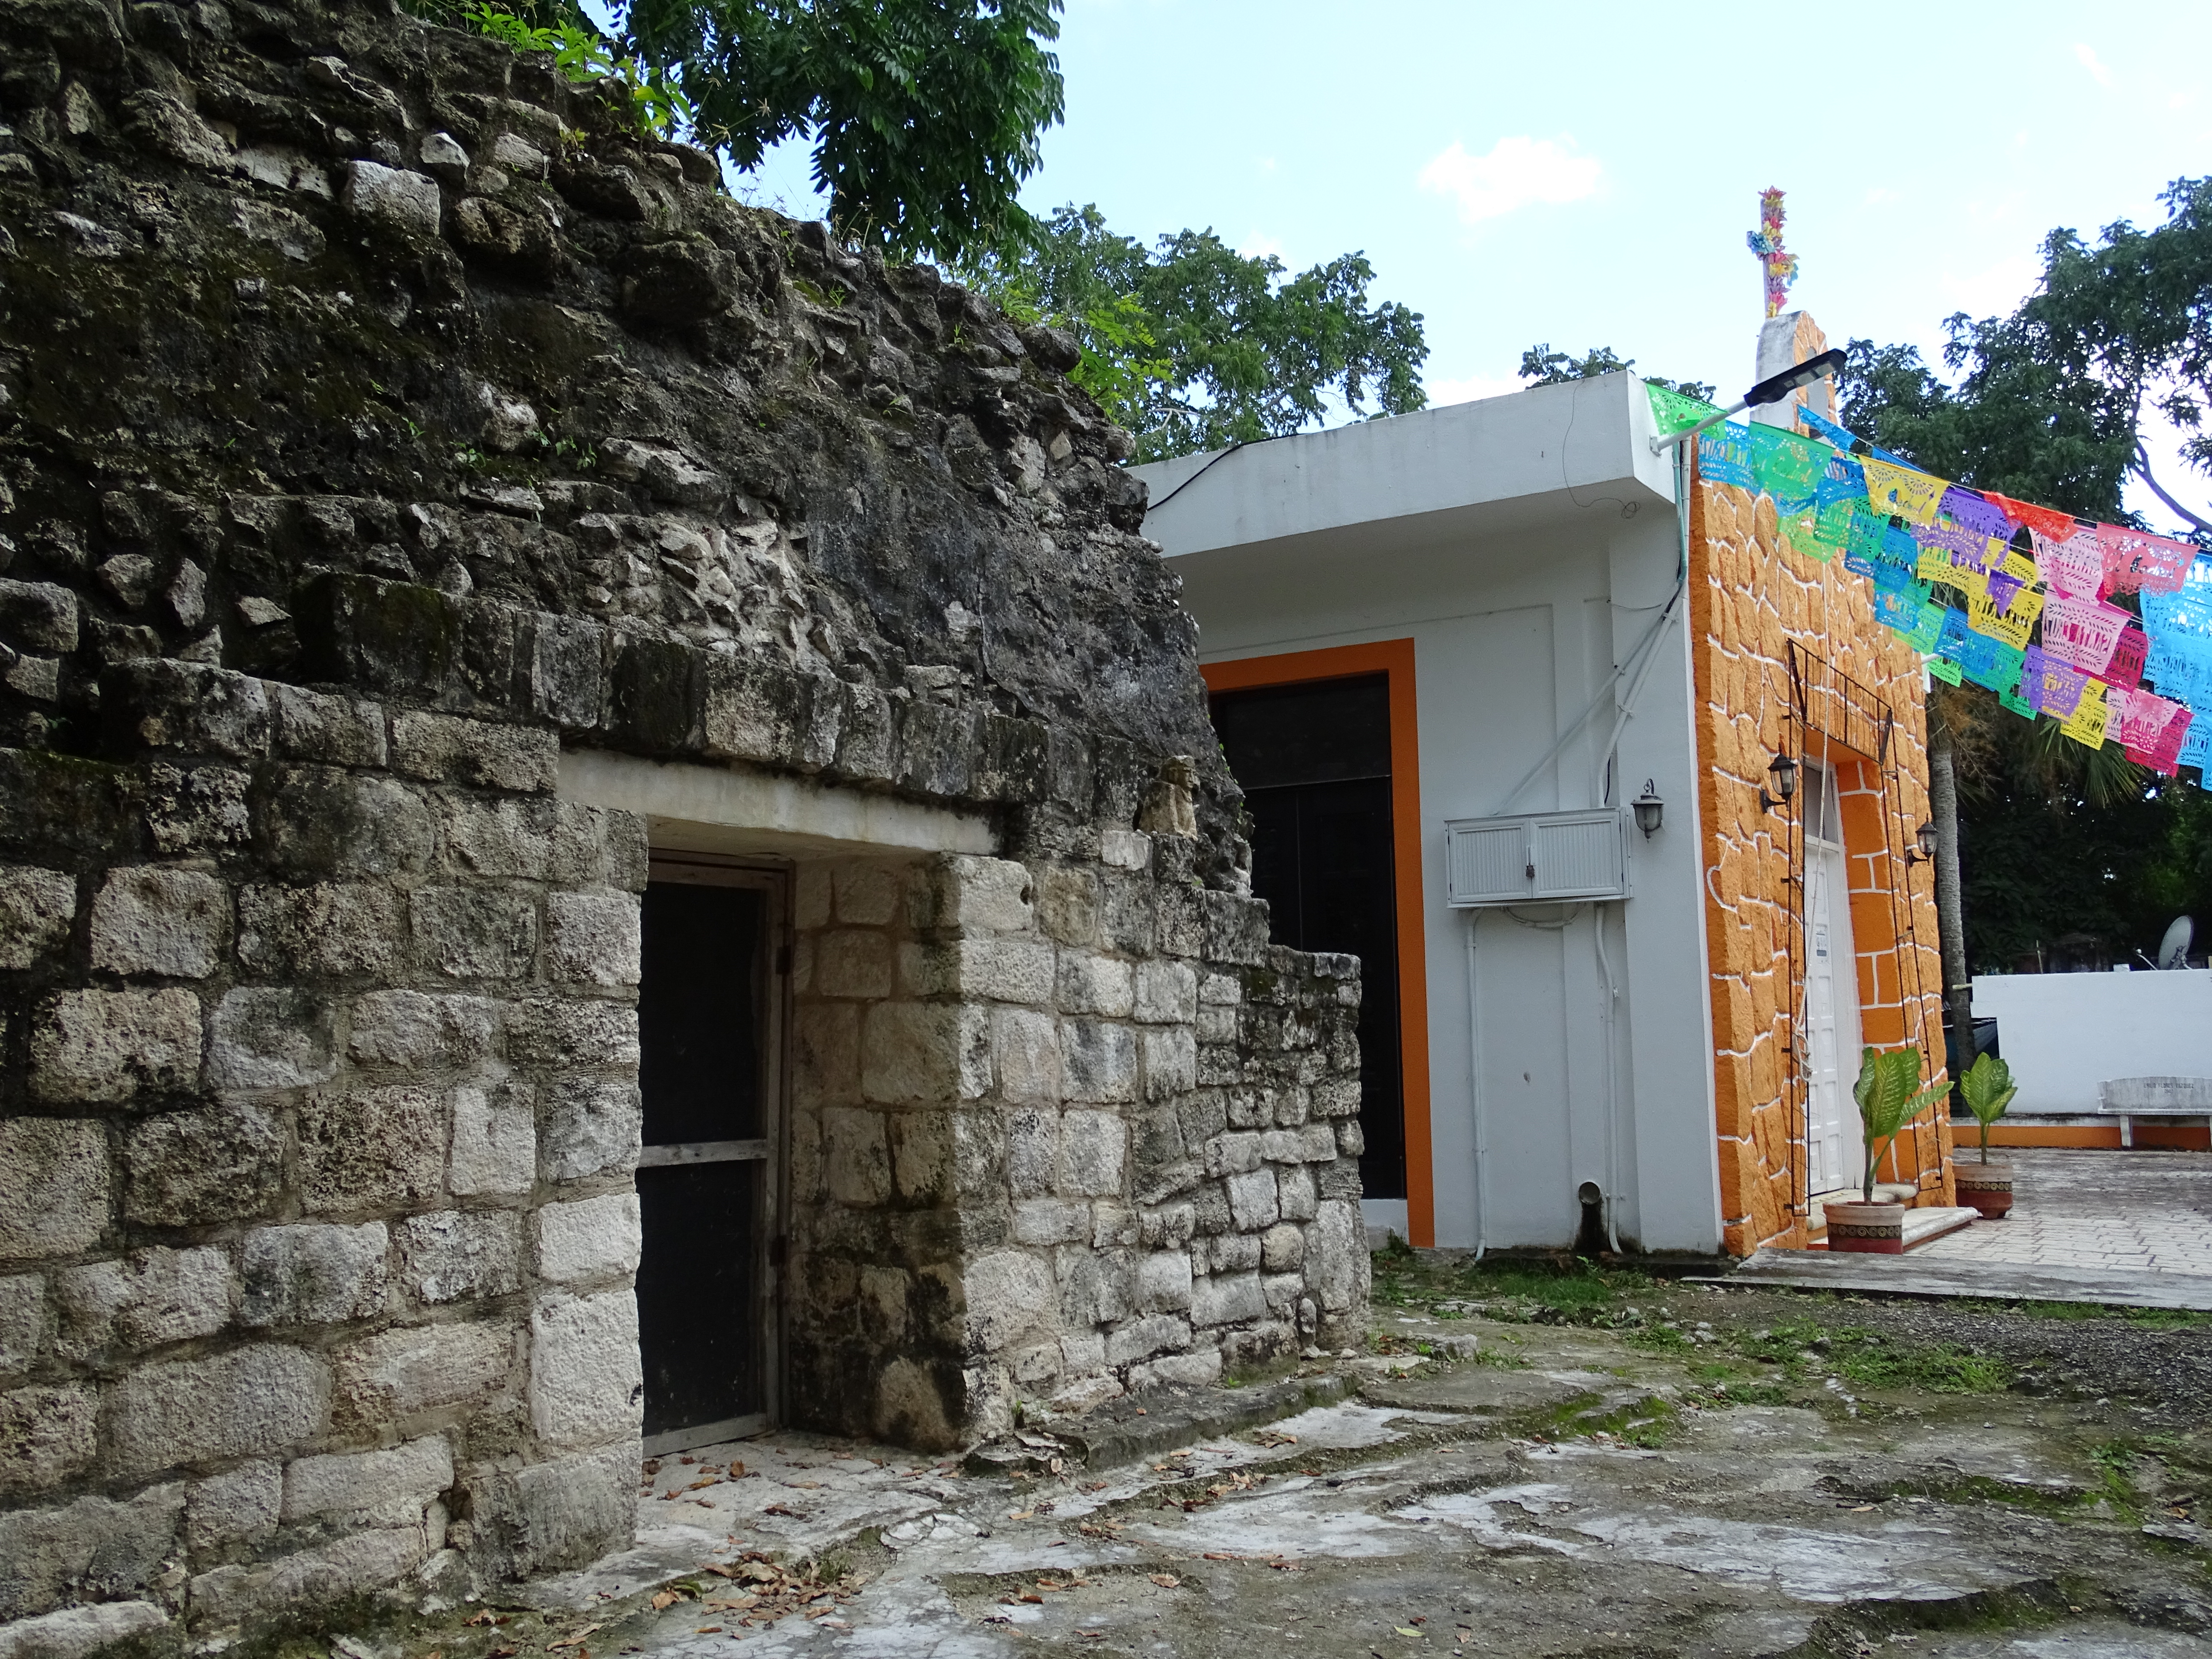 File:Mayan Temple Next to Catholic Church - El Cedral - Cozumel -   - Wikimedia Commons